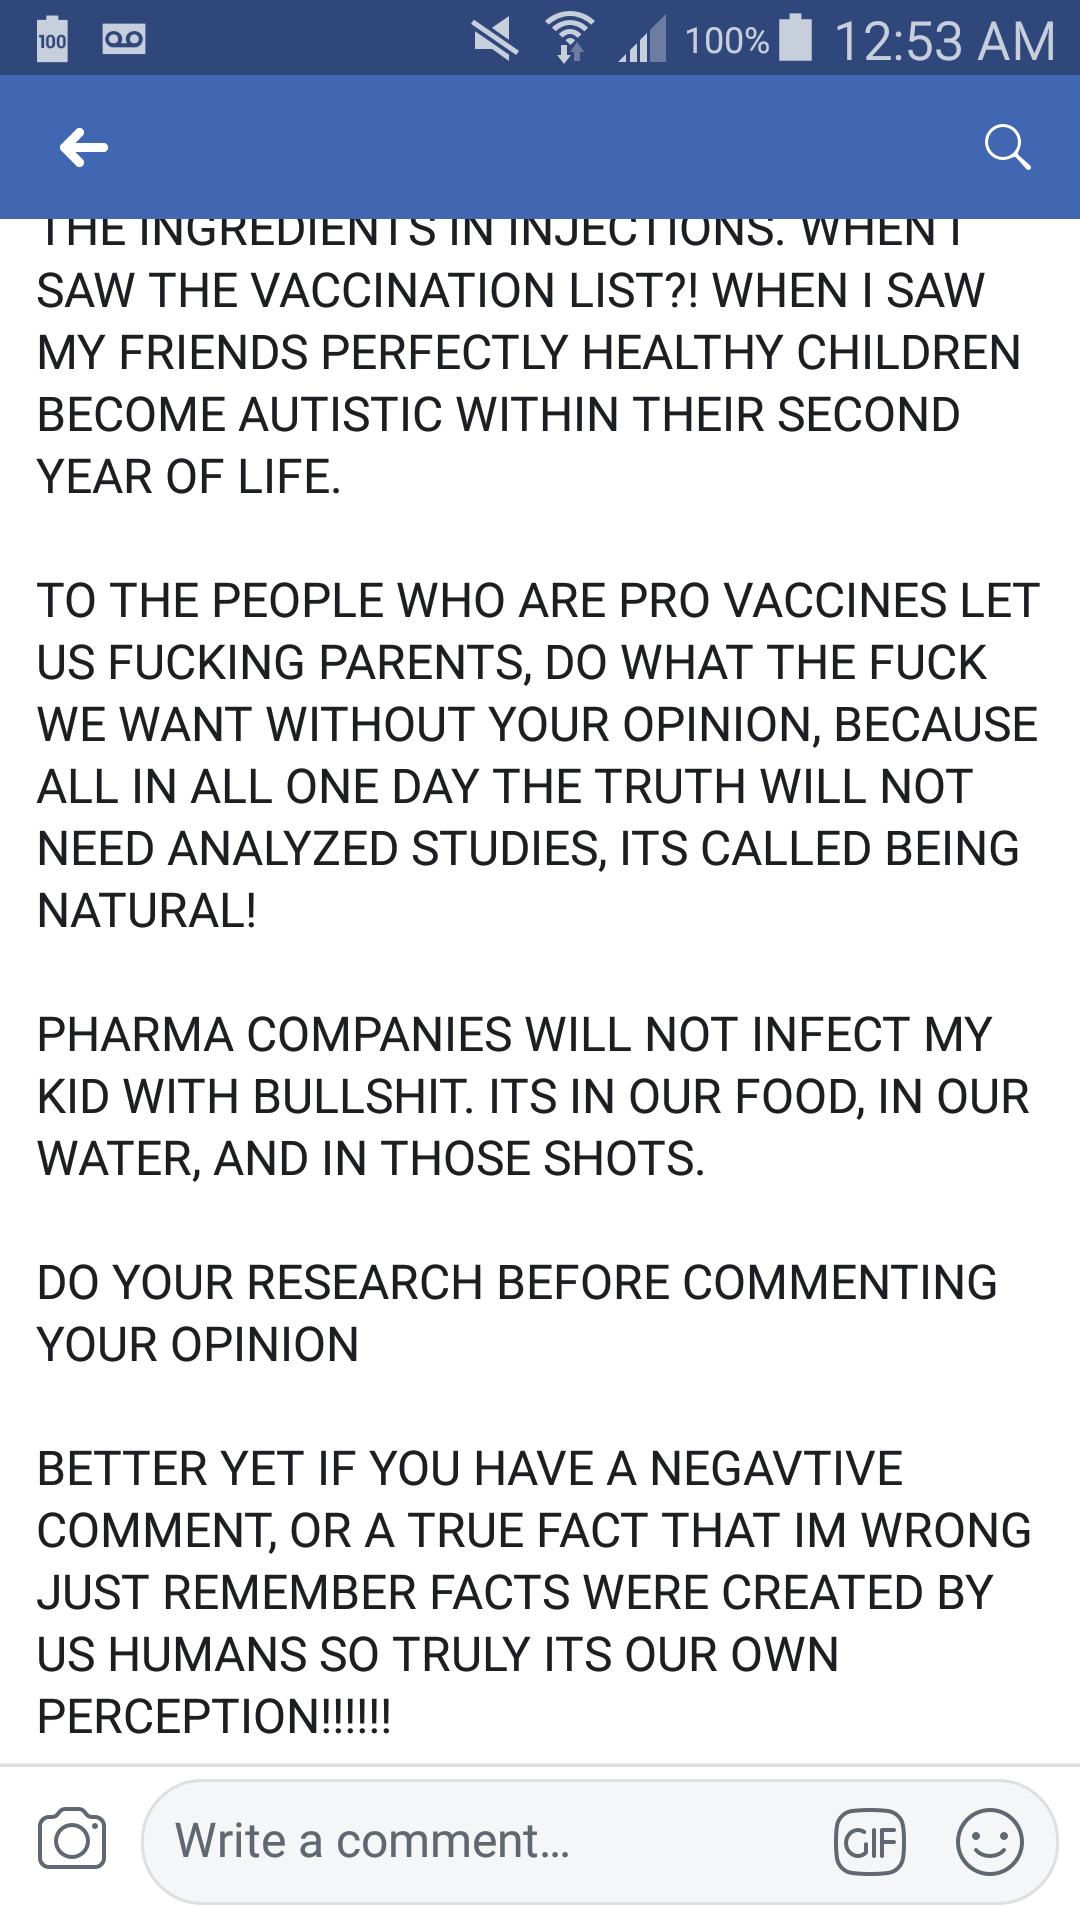 Some would say polio is natural : AntiVaxxers